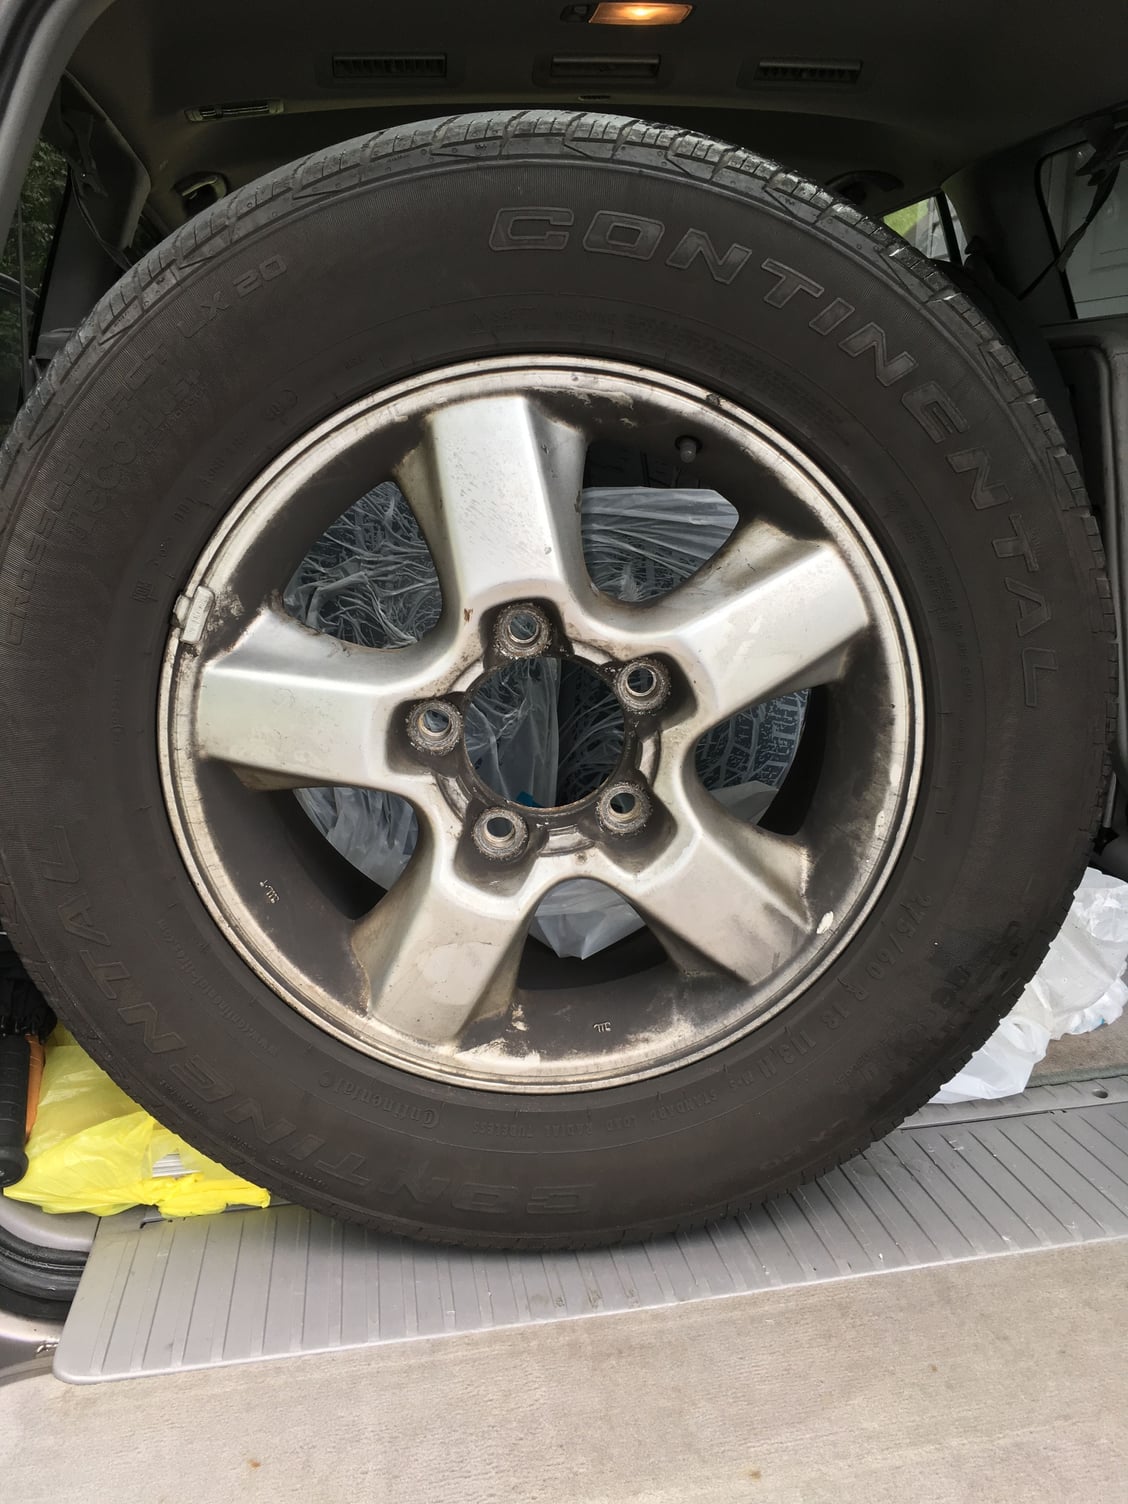 Wheels and Tires/Axles - (PA) Set of 4 Land Cruiser Wheels and Tires - $400 OBO - Used - 1998 to 2007 Toyota Land Cruiser - Philadelphia, PA 19103, United States